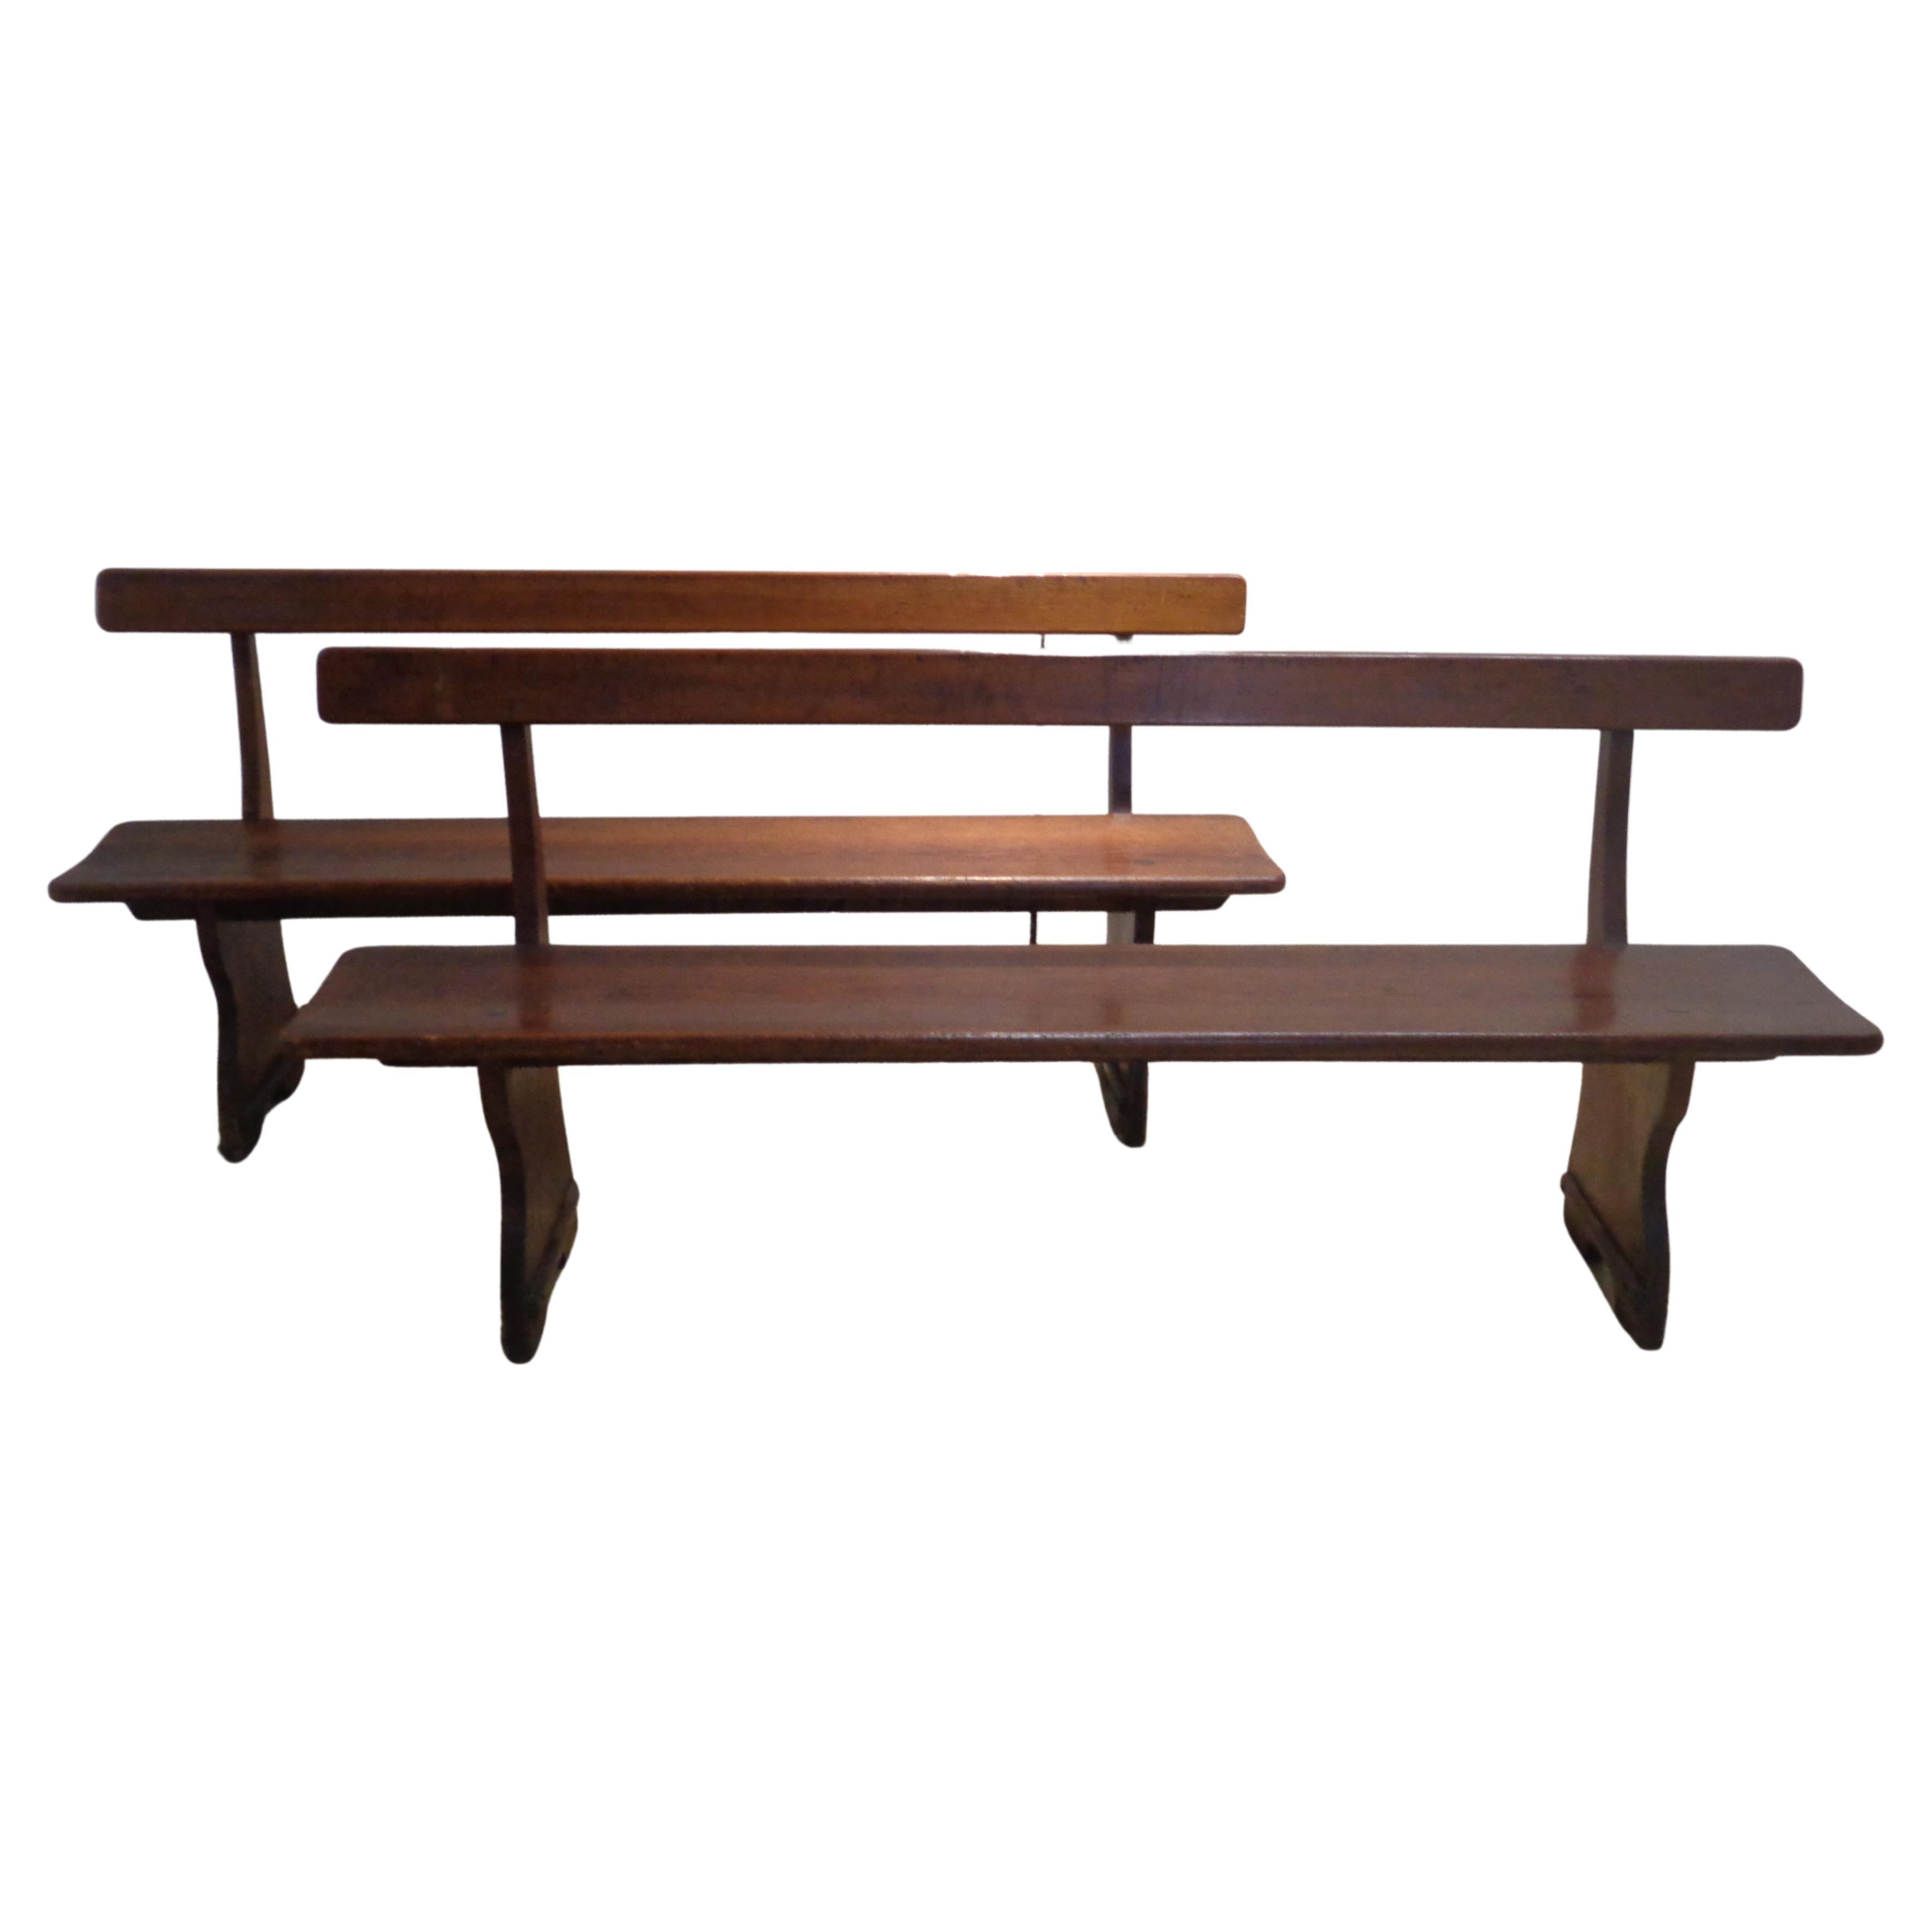  Exceptional Antique American Country Benches In Good Condition For Sale In Rochester, NY